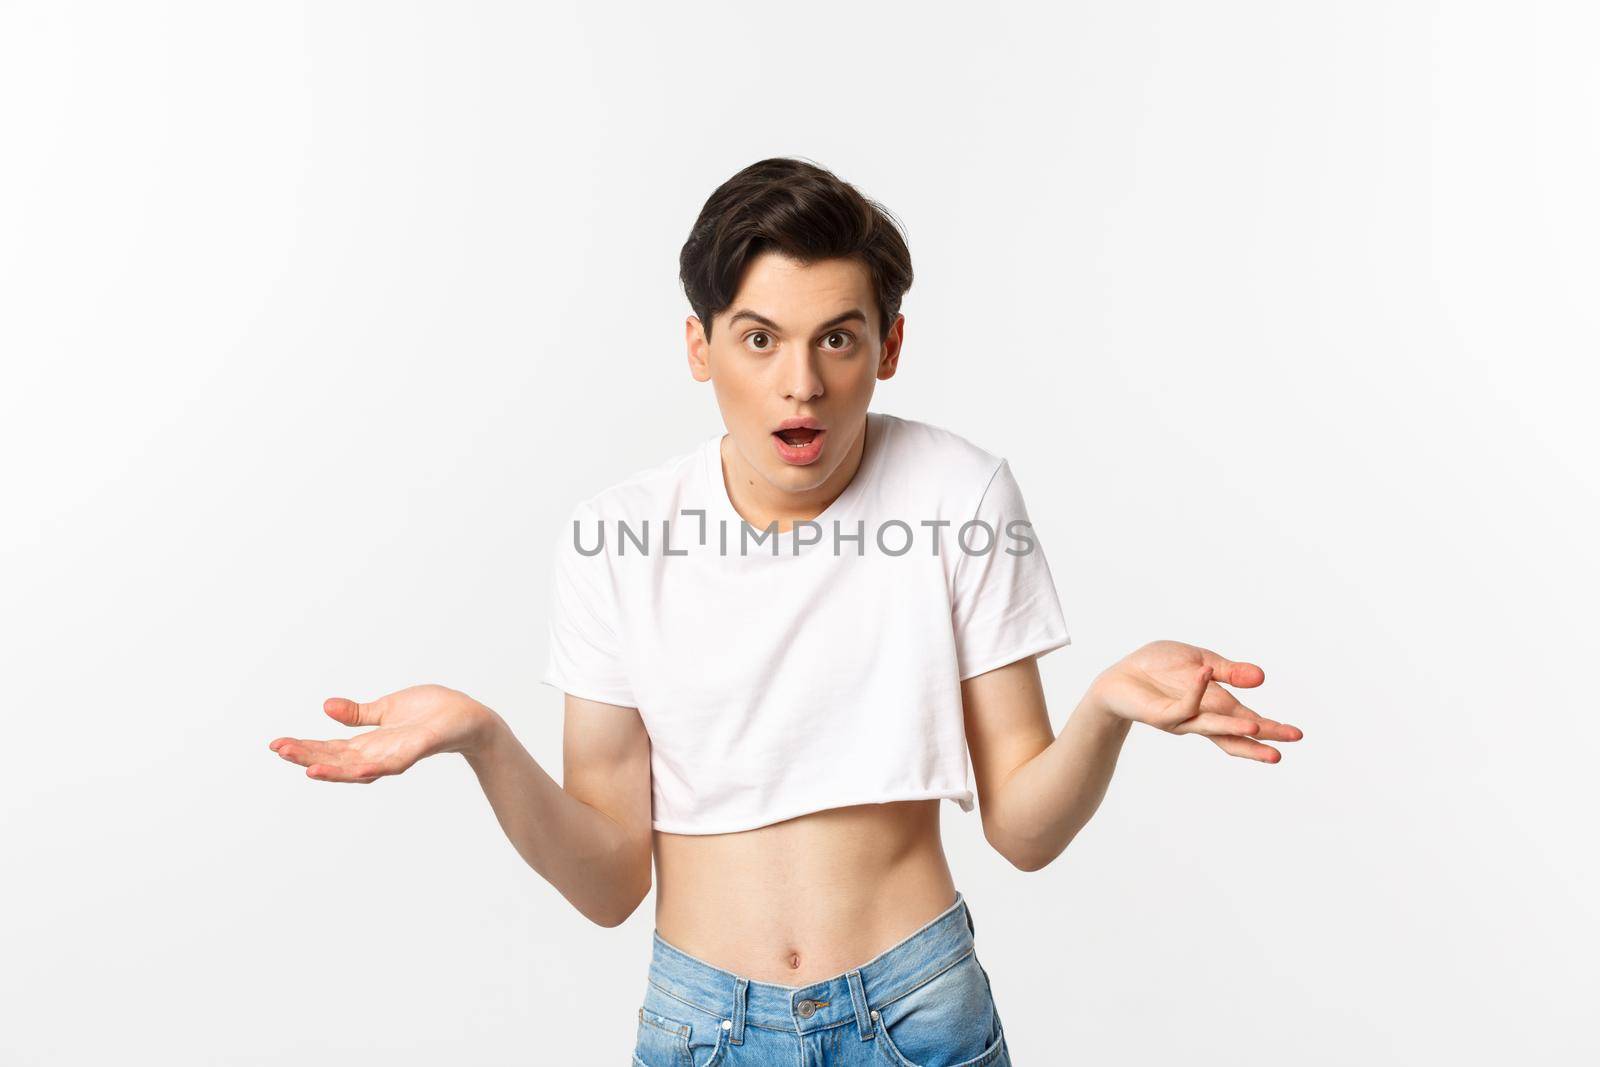 Lgbtq community. Confused gay man in crop top shrugging and staring at camera, cant understand, standing over white background.